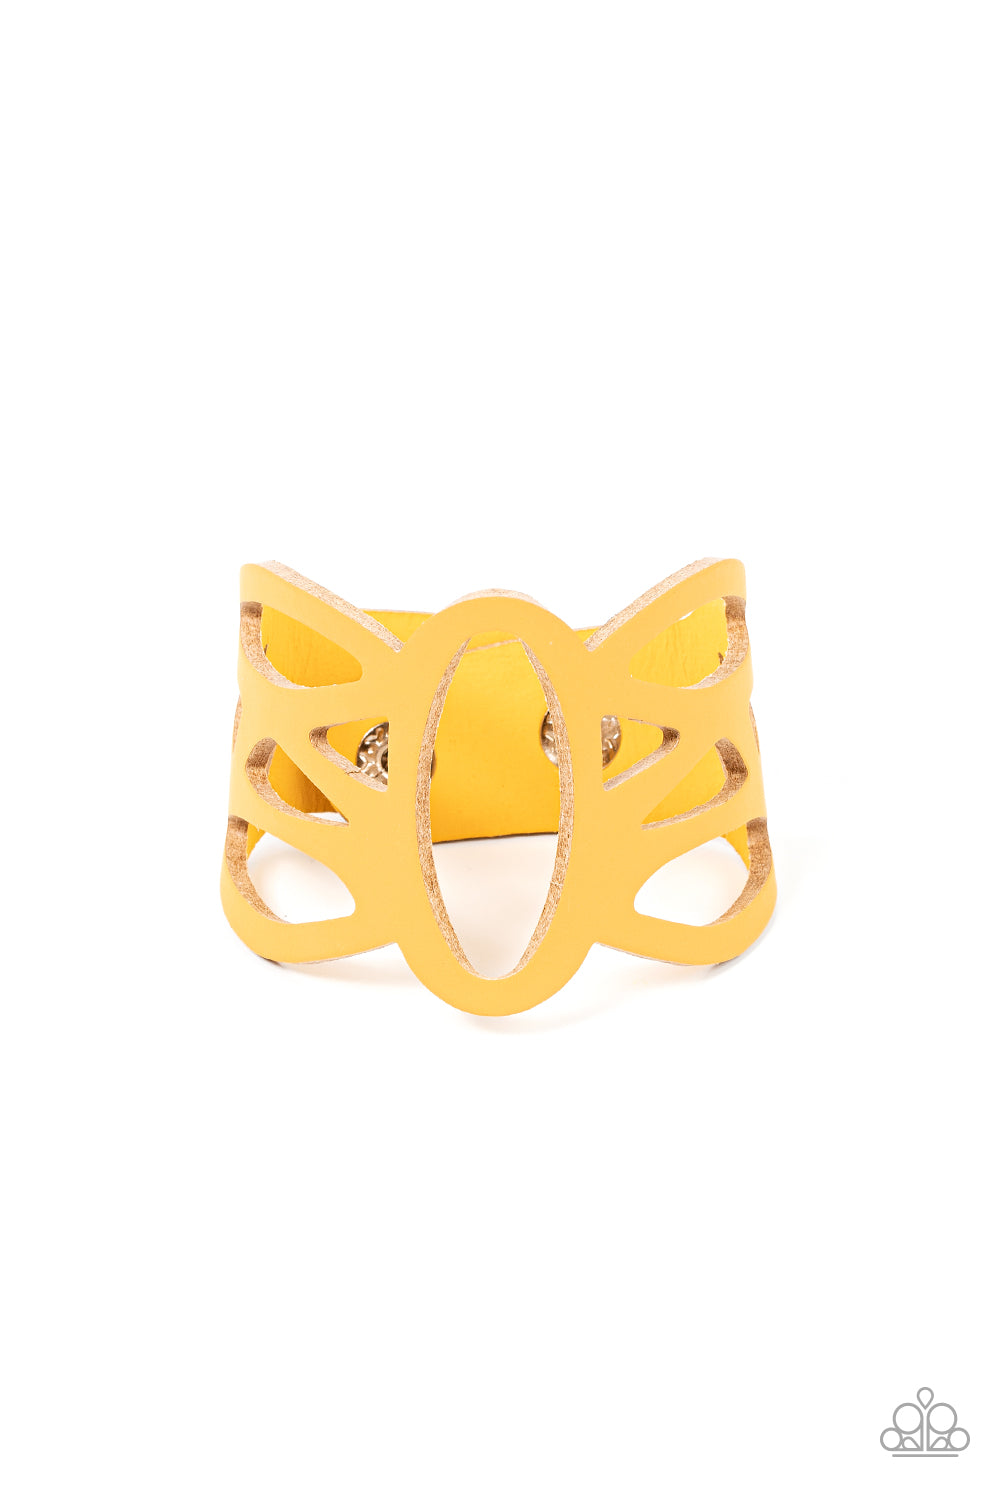 golden yellow leather band has been ornately cut into an airy stenciled pattern